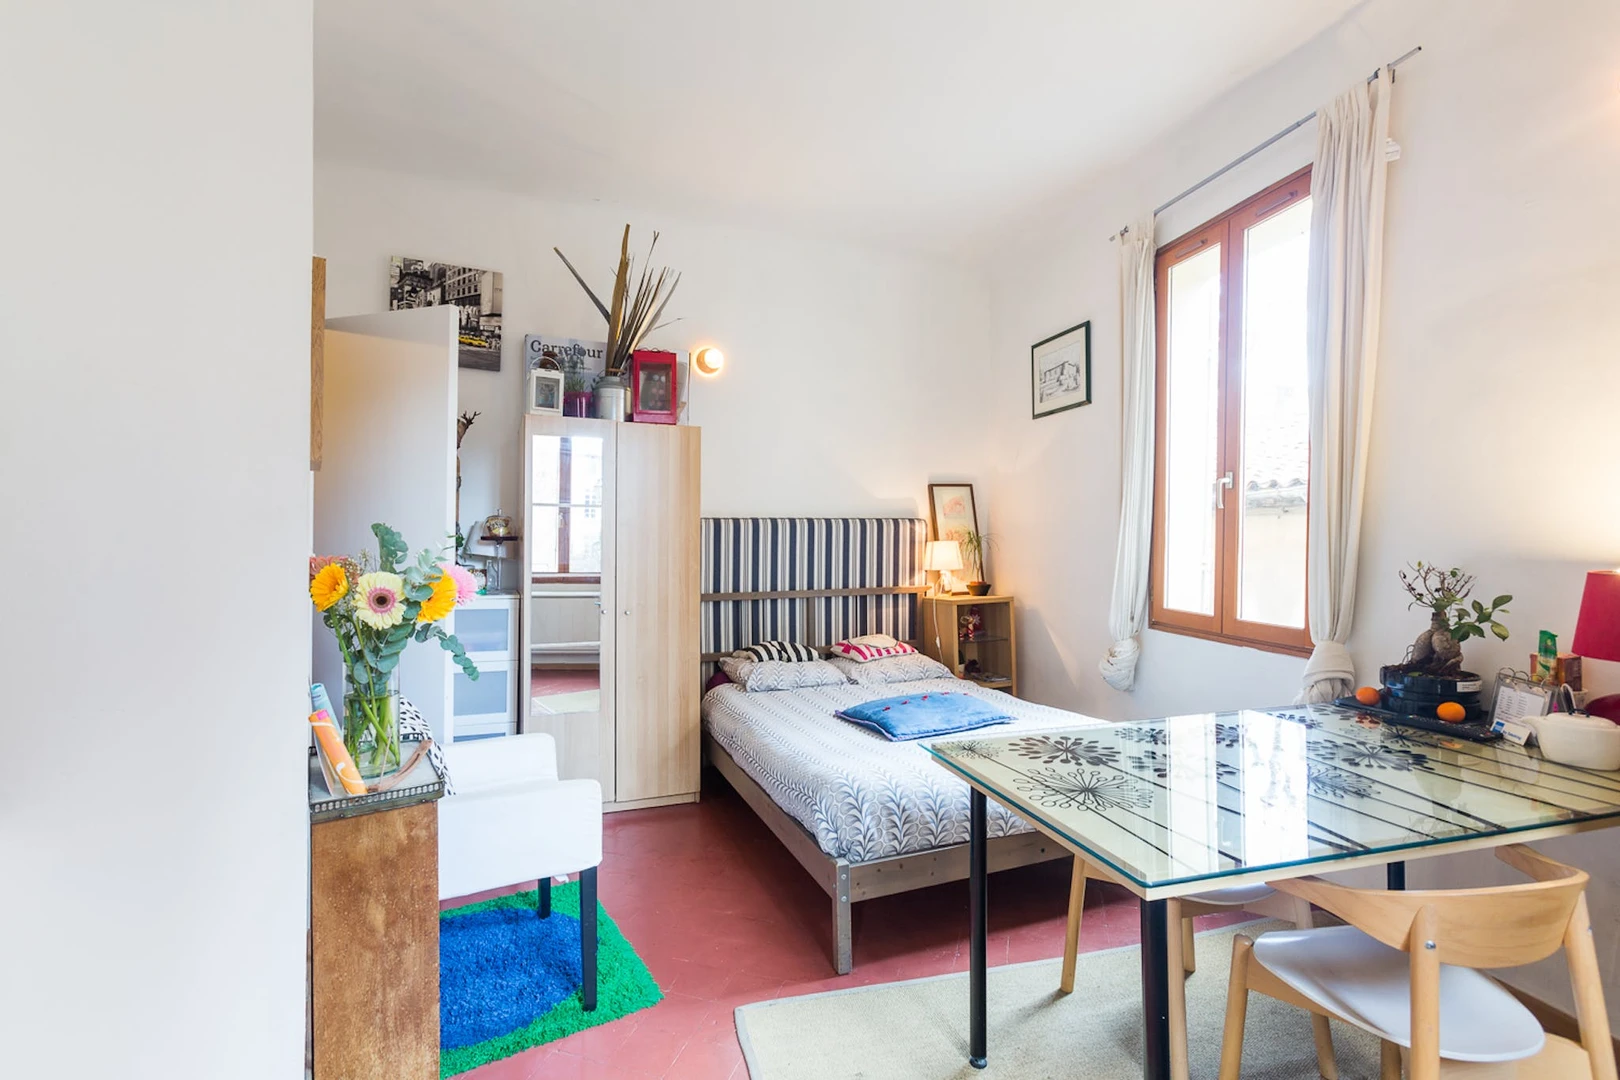 Accommodation in the centre of Aix-en-provence